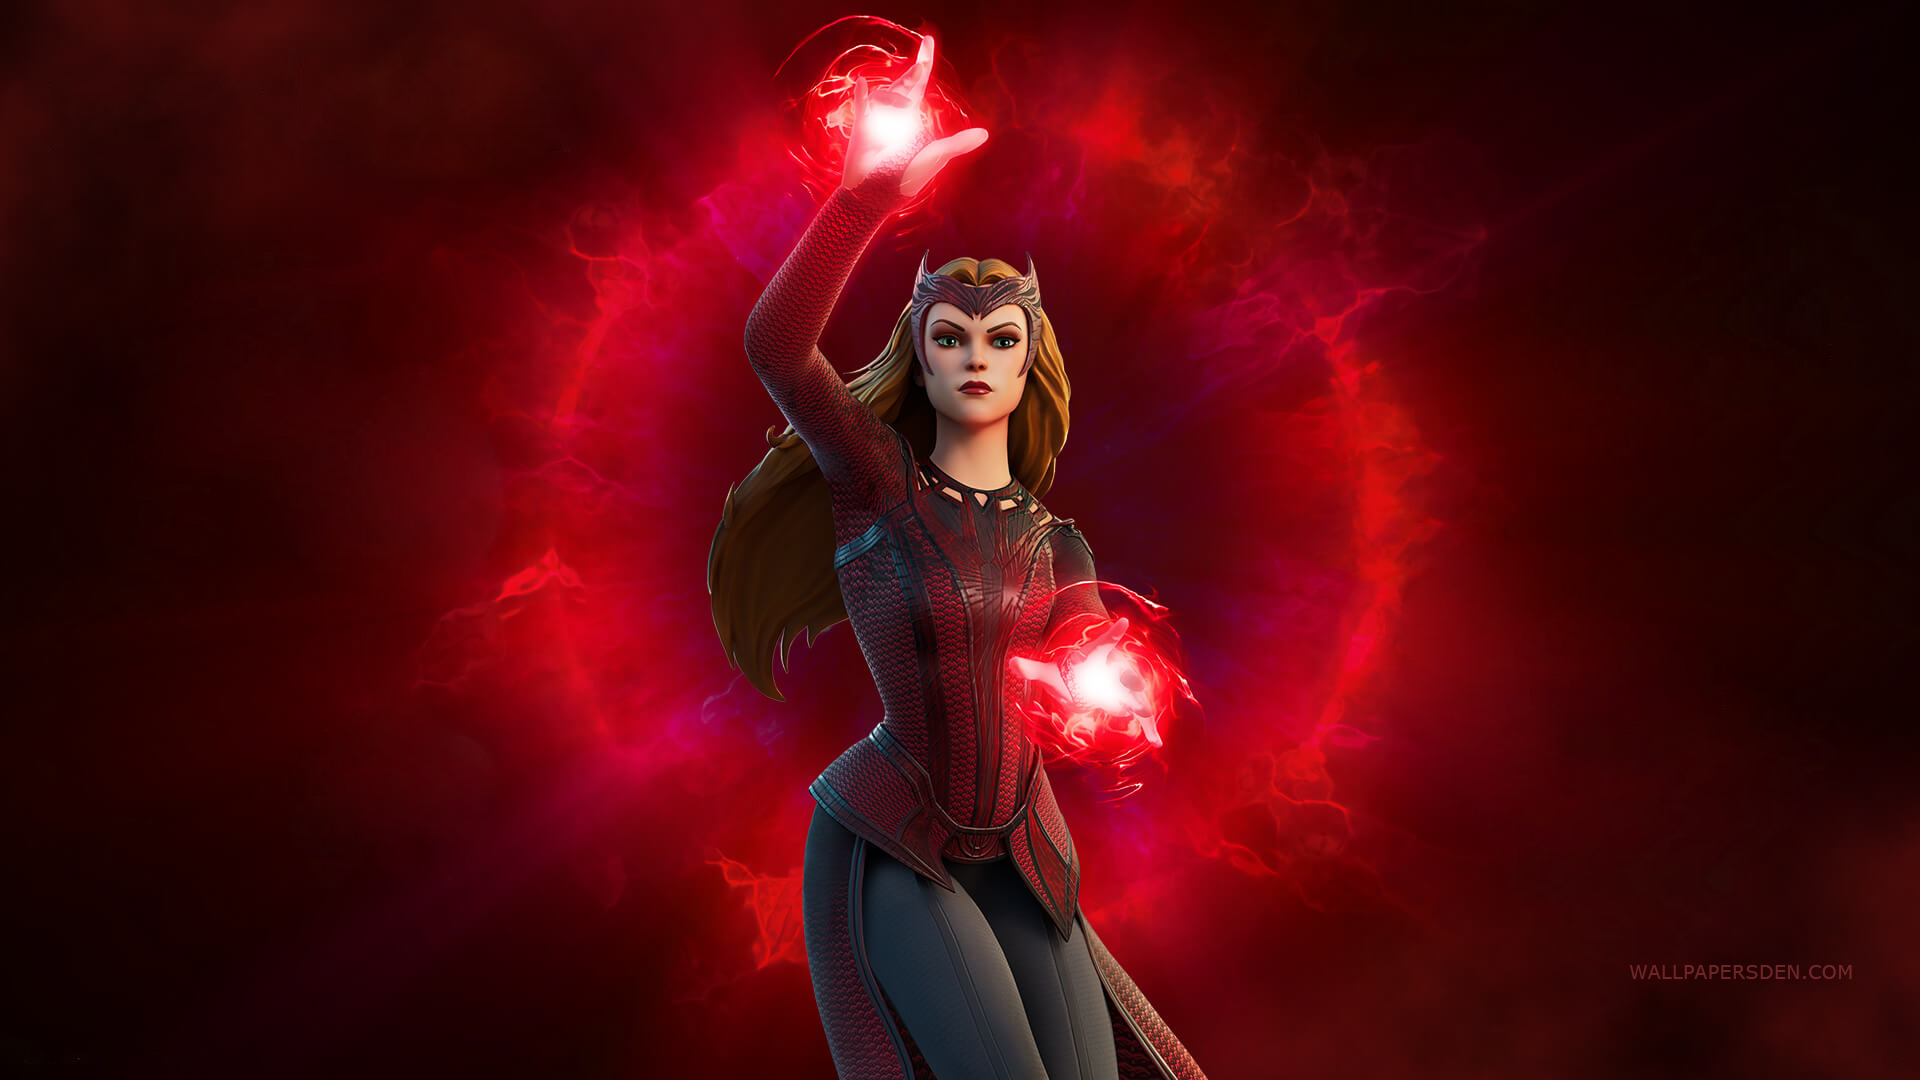 Free download Scarlet Witch Wallpapers Top 35 Best Scarlet Witch  Backgrounds 1920x1080 for your Desktop Mobile  Tablet  Explore 24 Scarlet  Witch Desktop Wallpapers  Witch Wallpaper Halloween Witch Wallpaper  Halloween Witch Wallpapers